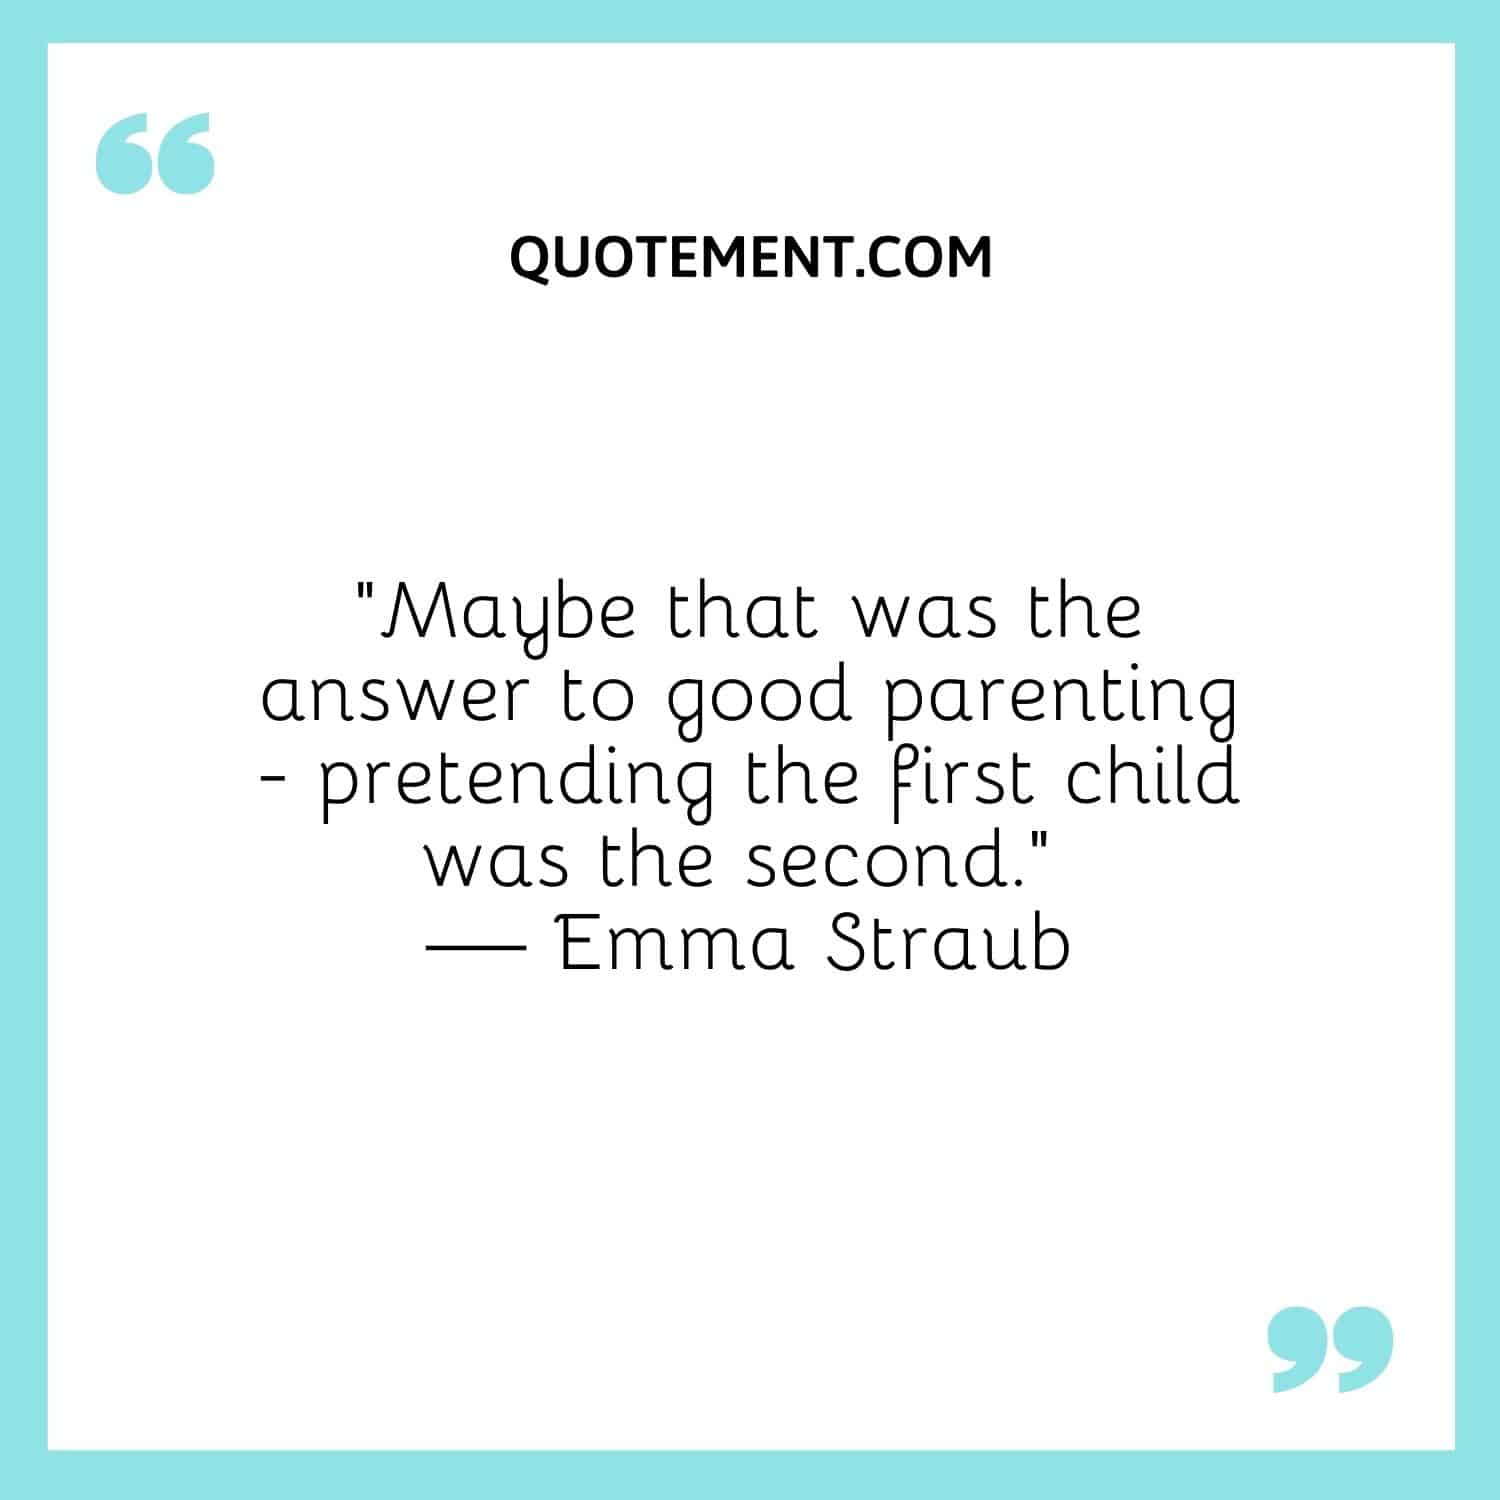 Maybe that was the answer to good parenting - pretending the first child was the second.